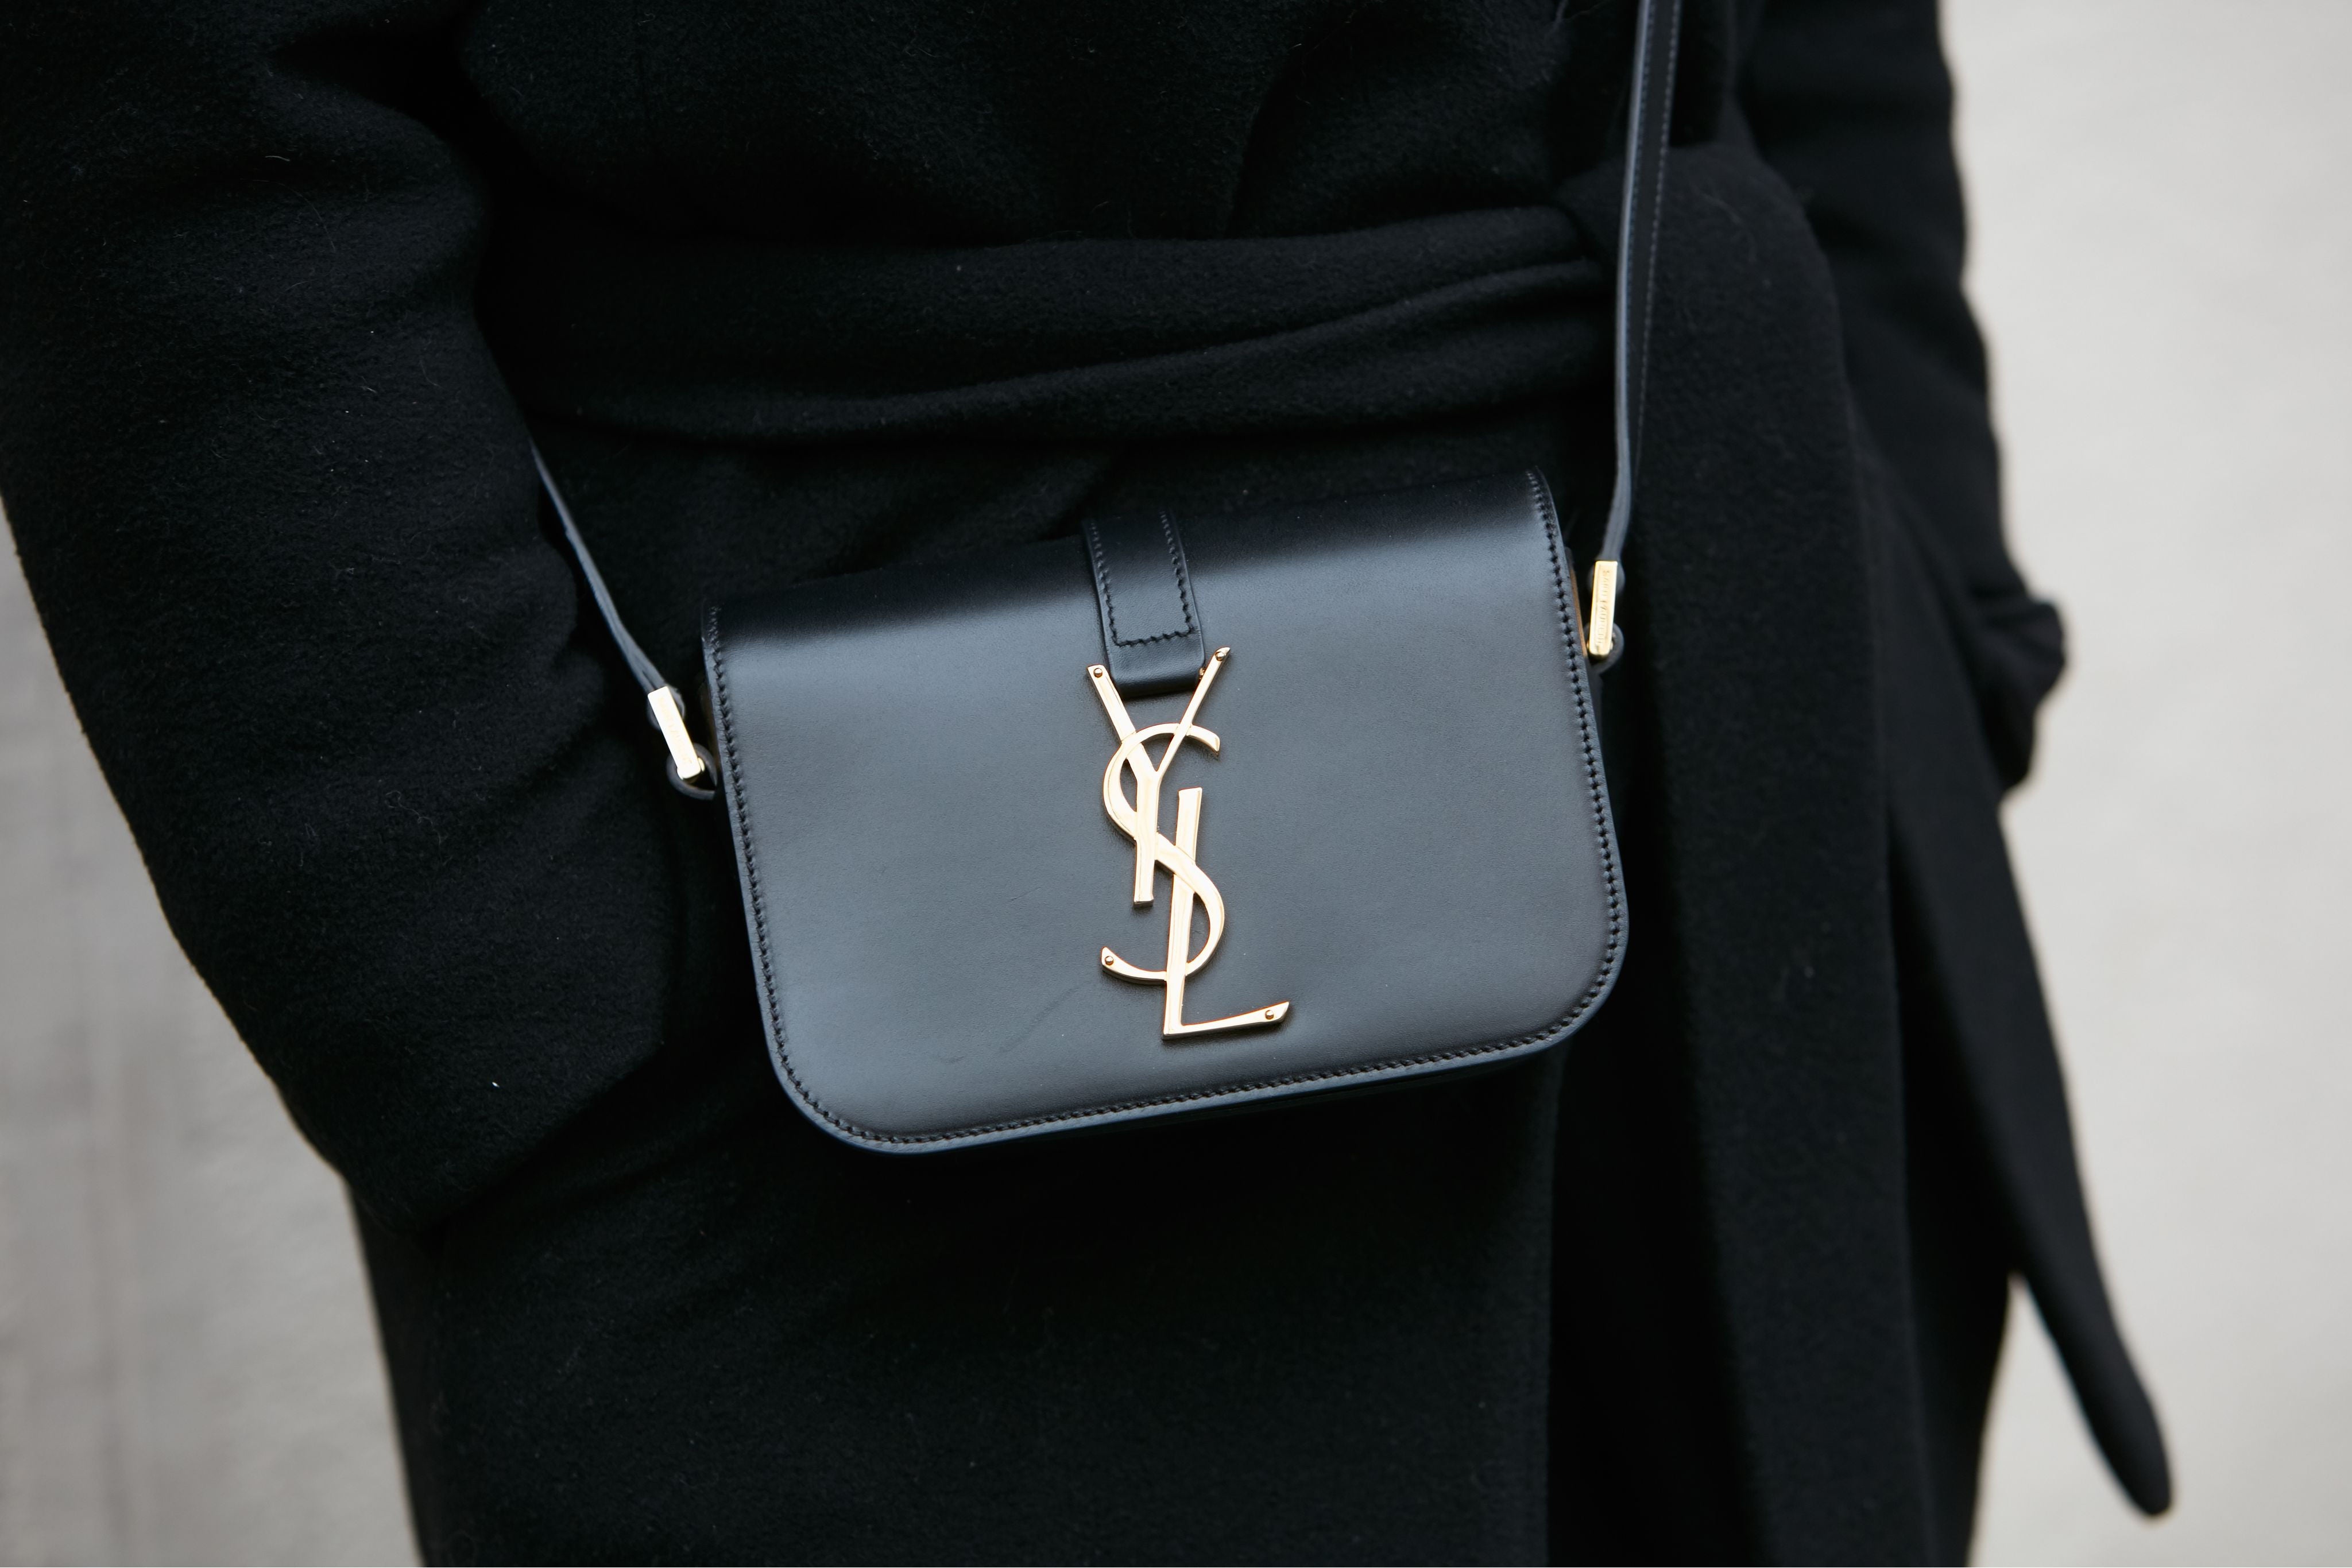 Vivrelle review: We borrowed Gucci, YSL bags in 2023